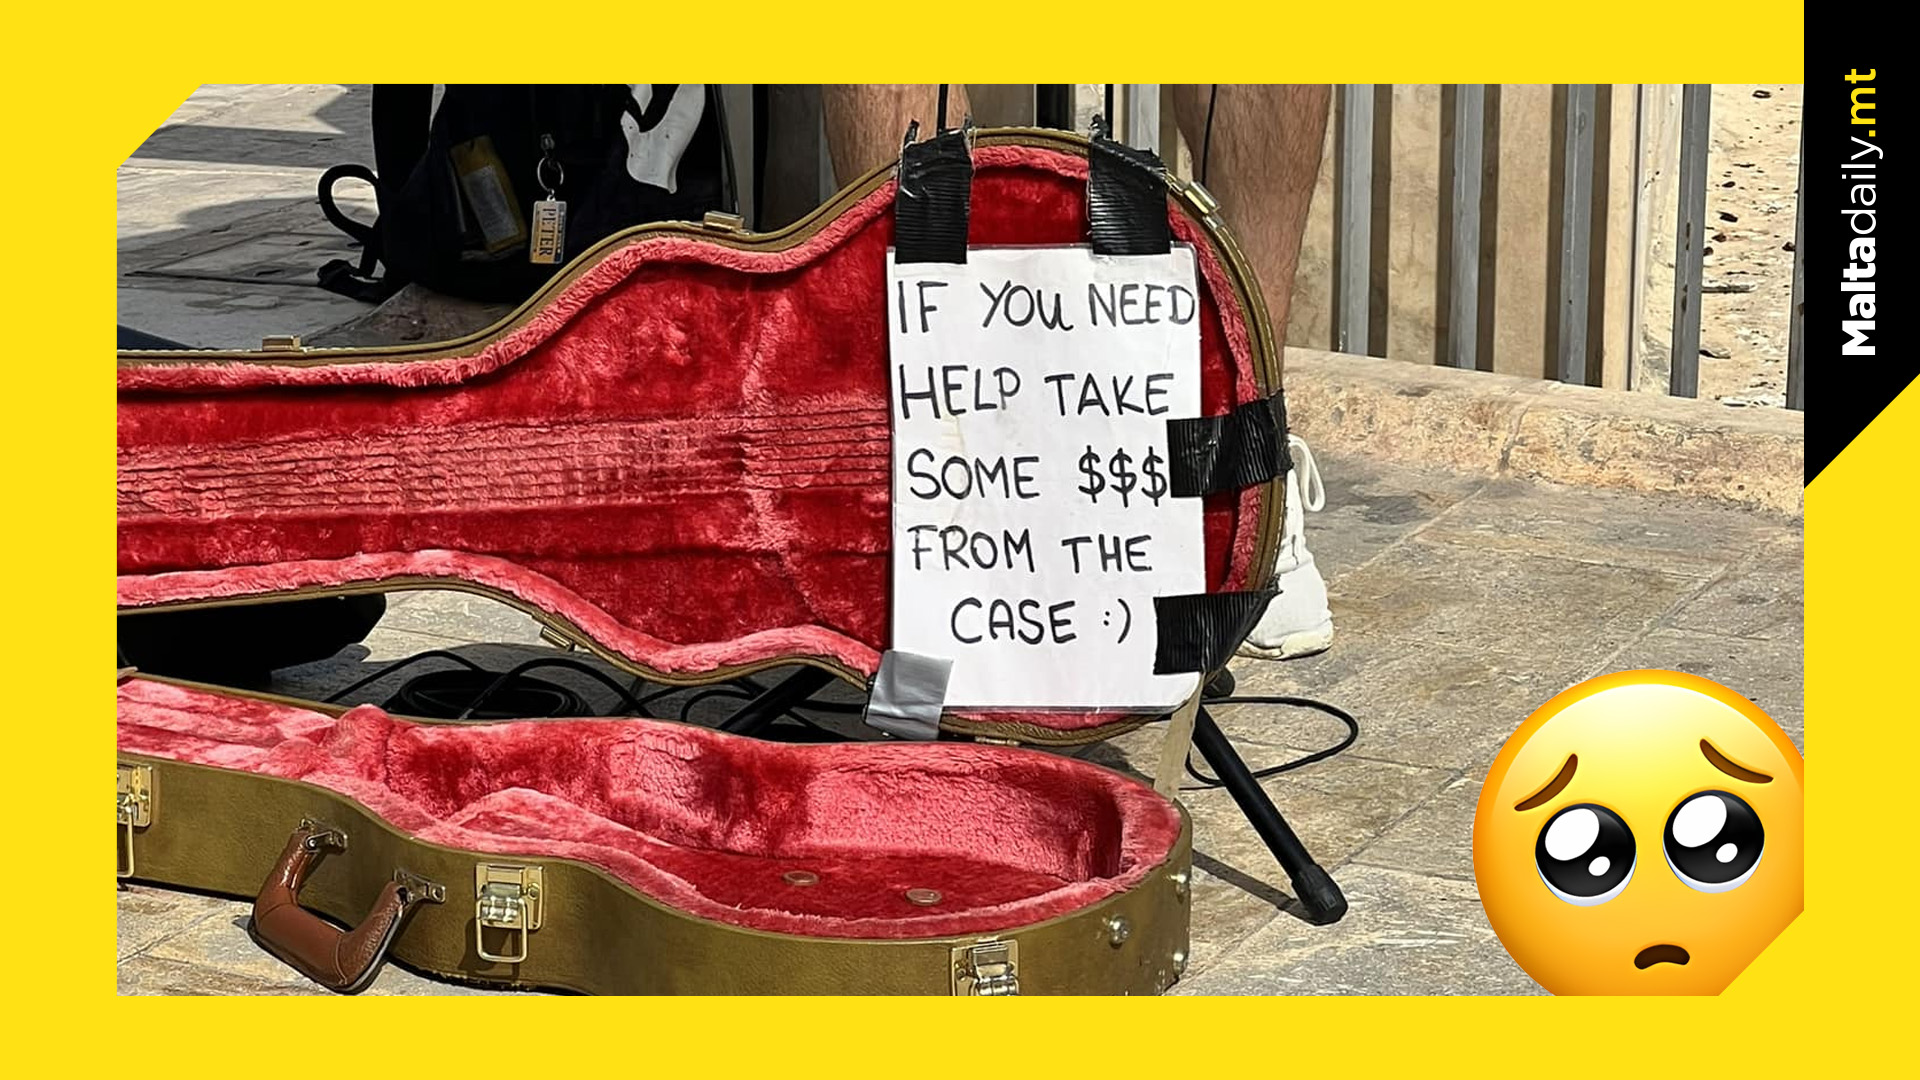 Valletta Busker Offers Money From His Case To People In Need